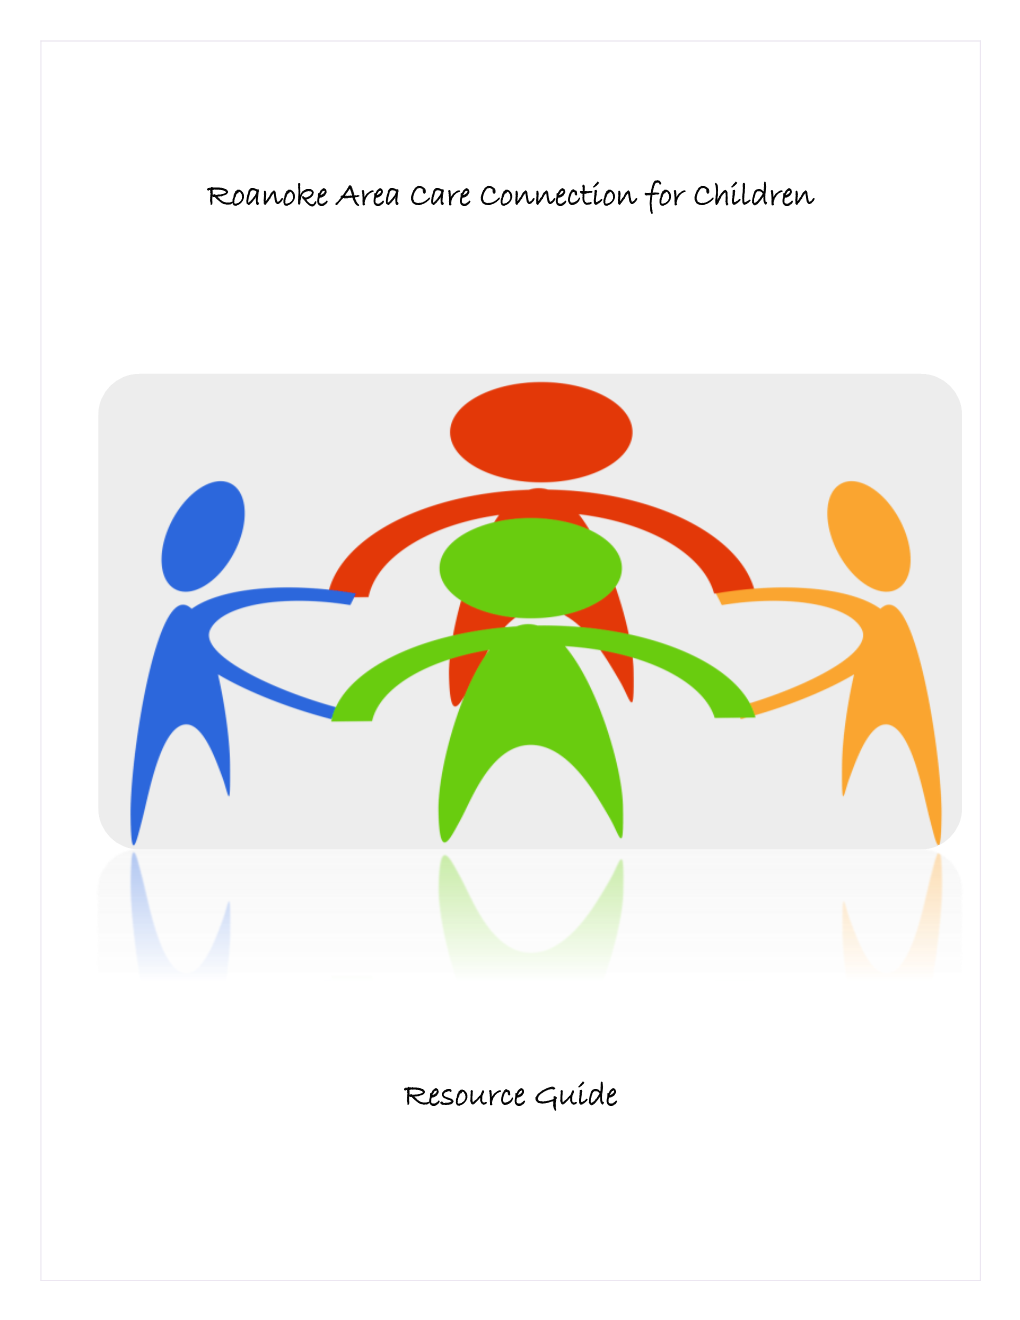 Roanoke Area Care Connection for Children Resource Guide.Pdf